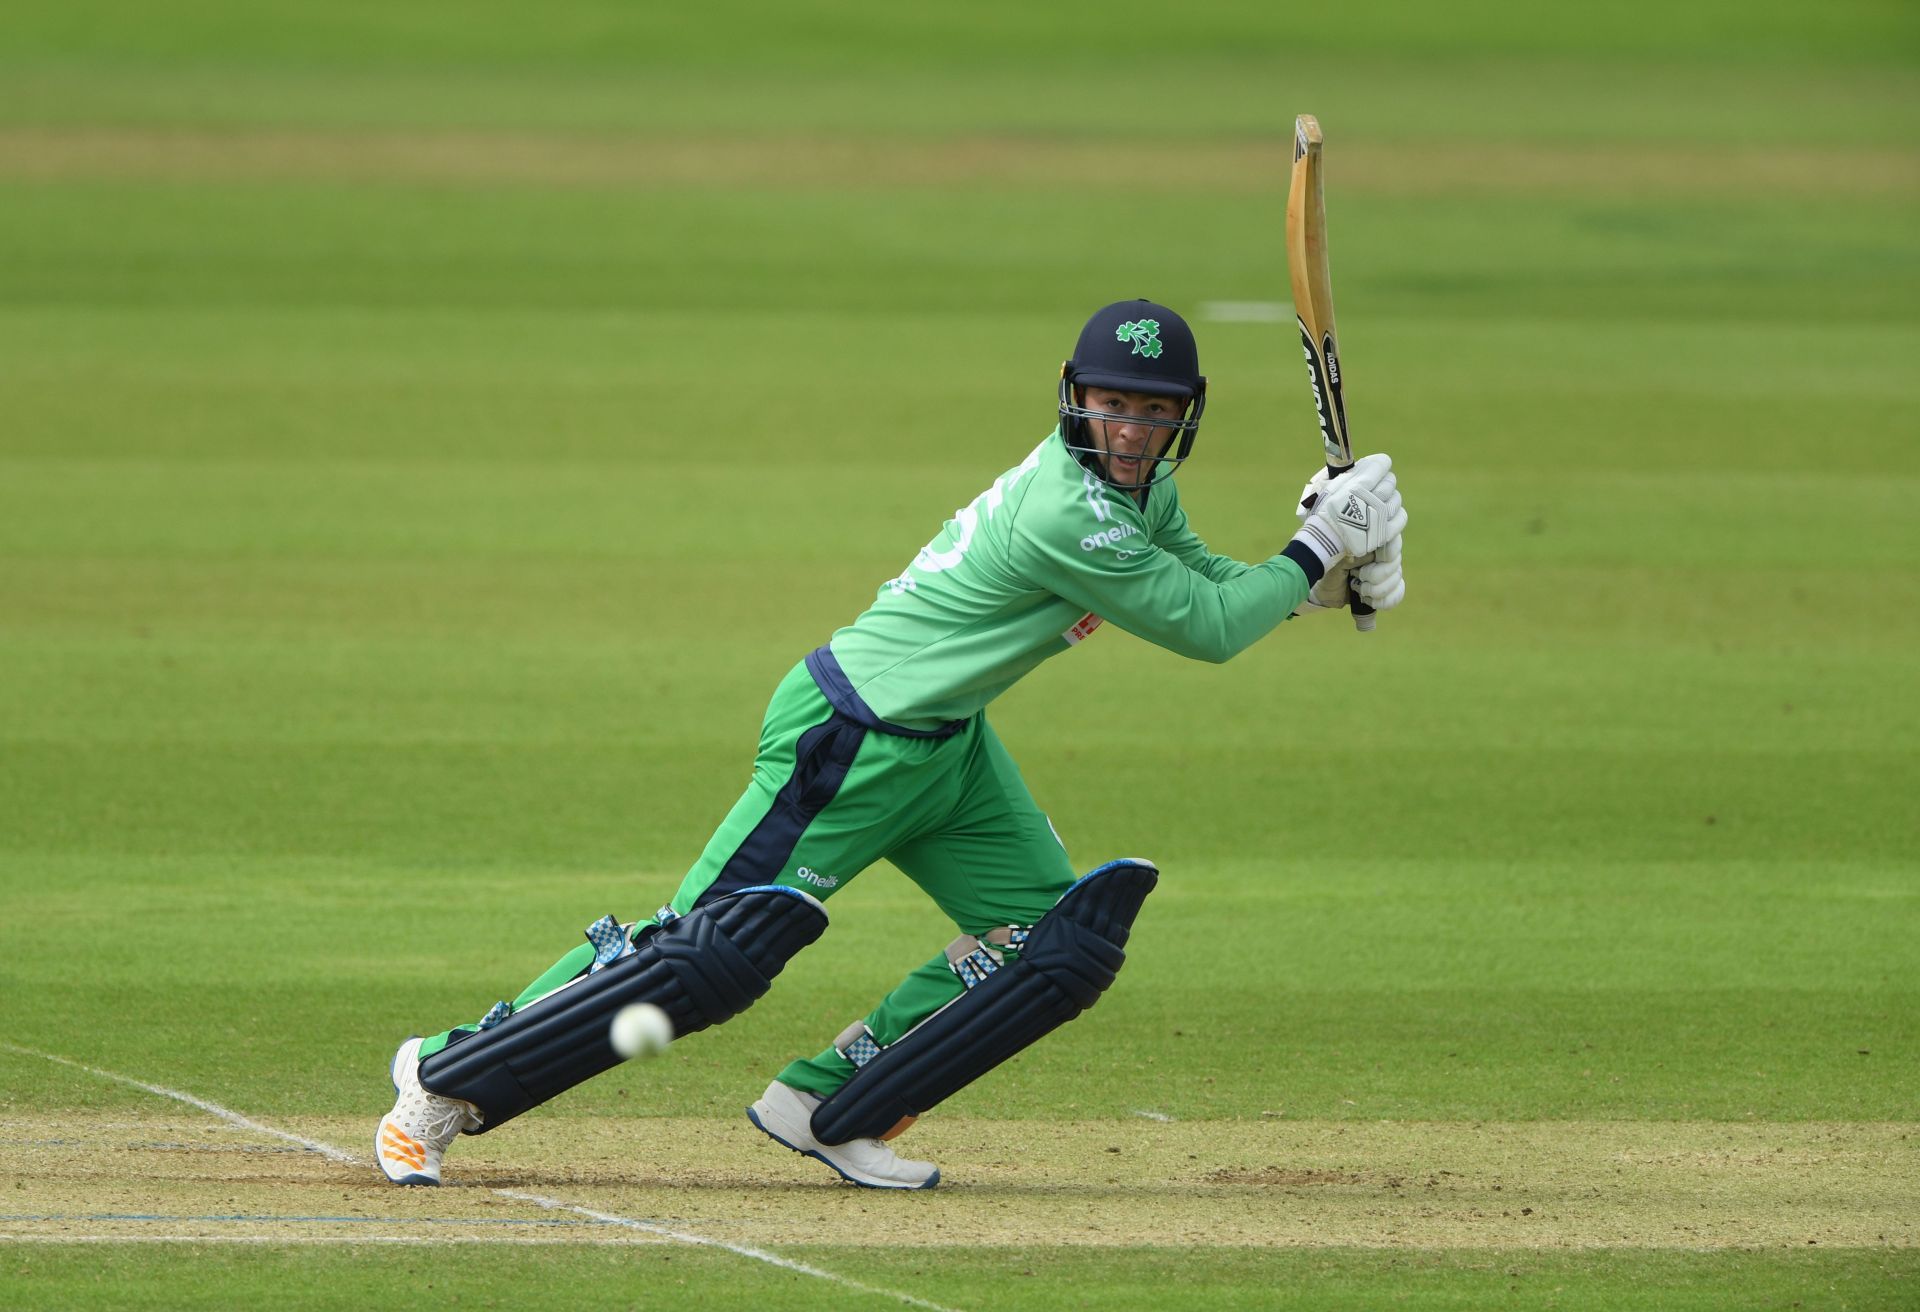 Innings played by Campher turned things around for Ireland